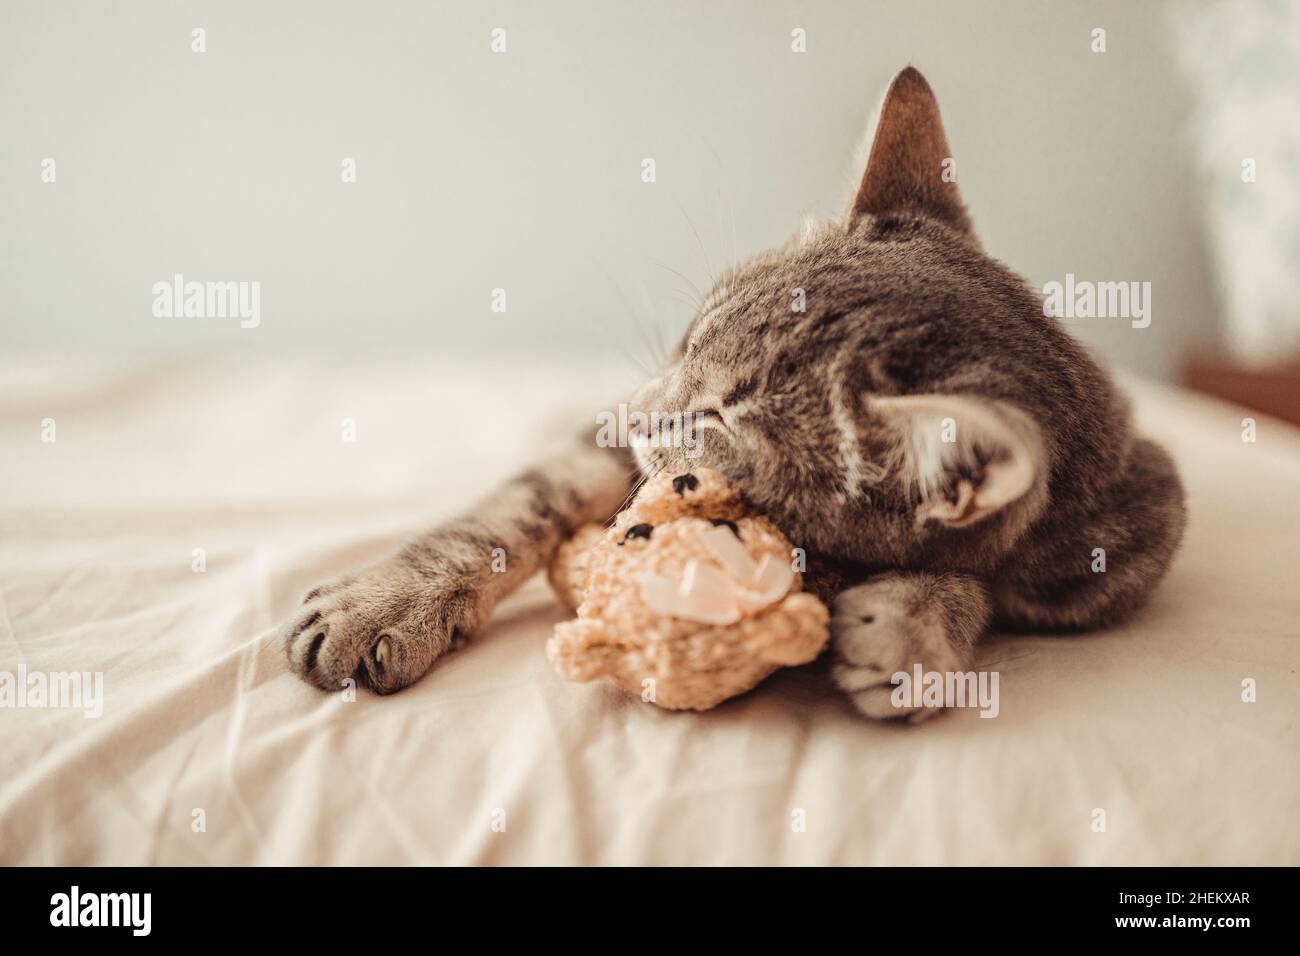 A cute tabby kitten lies in an embrace with a soft teddy bear toy on the bed. The cat sleeps on the sofa in the living room. Sweet dream, wake up in Stock Photo